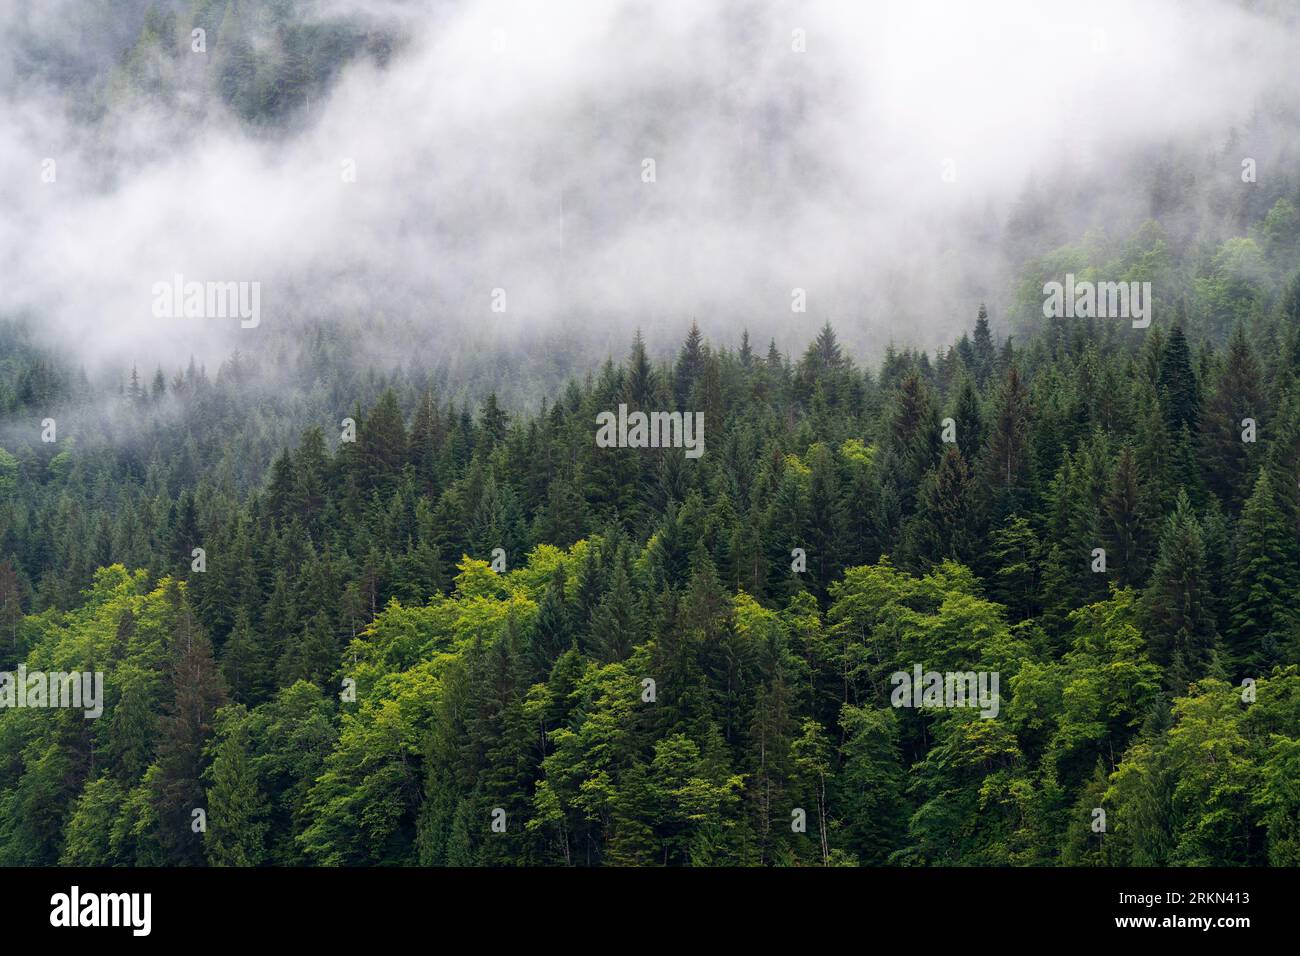 Pine trees in the mist landscape along Inside Passage cruise, Vancouver Island, British Columbia, Canada. Stock Photo